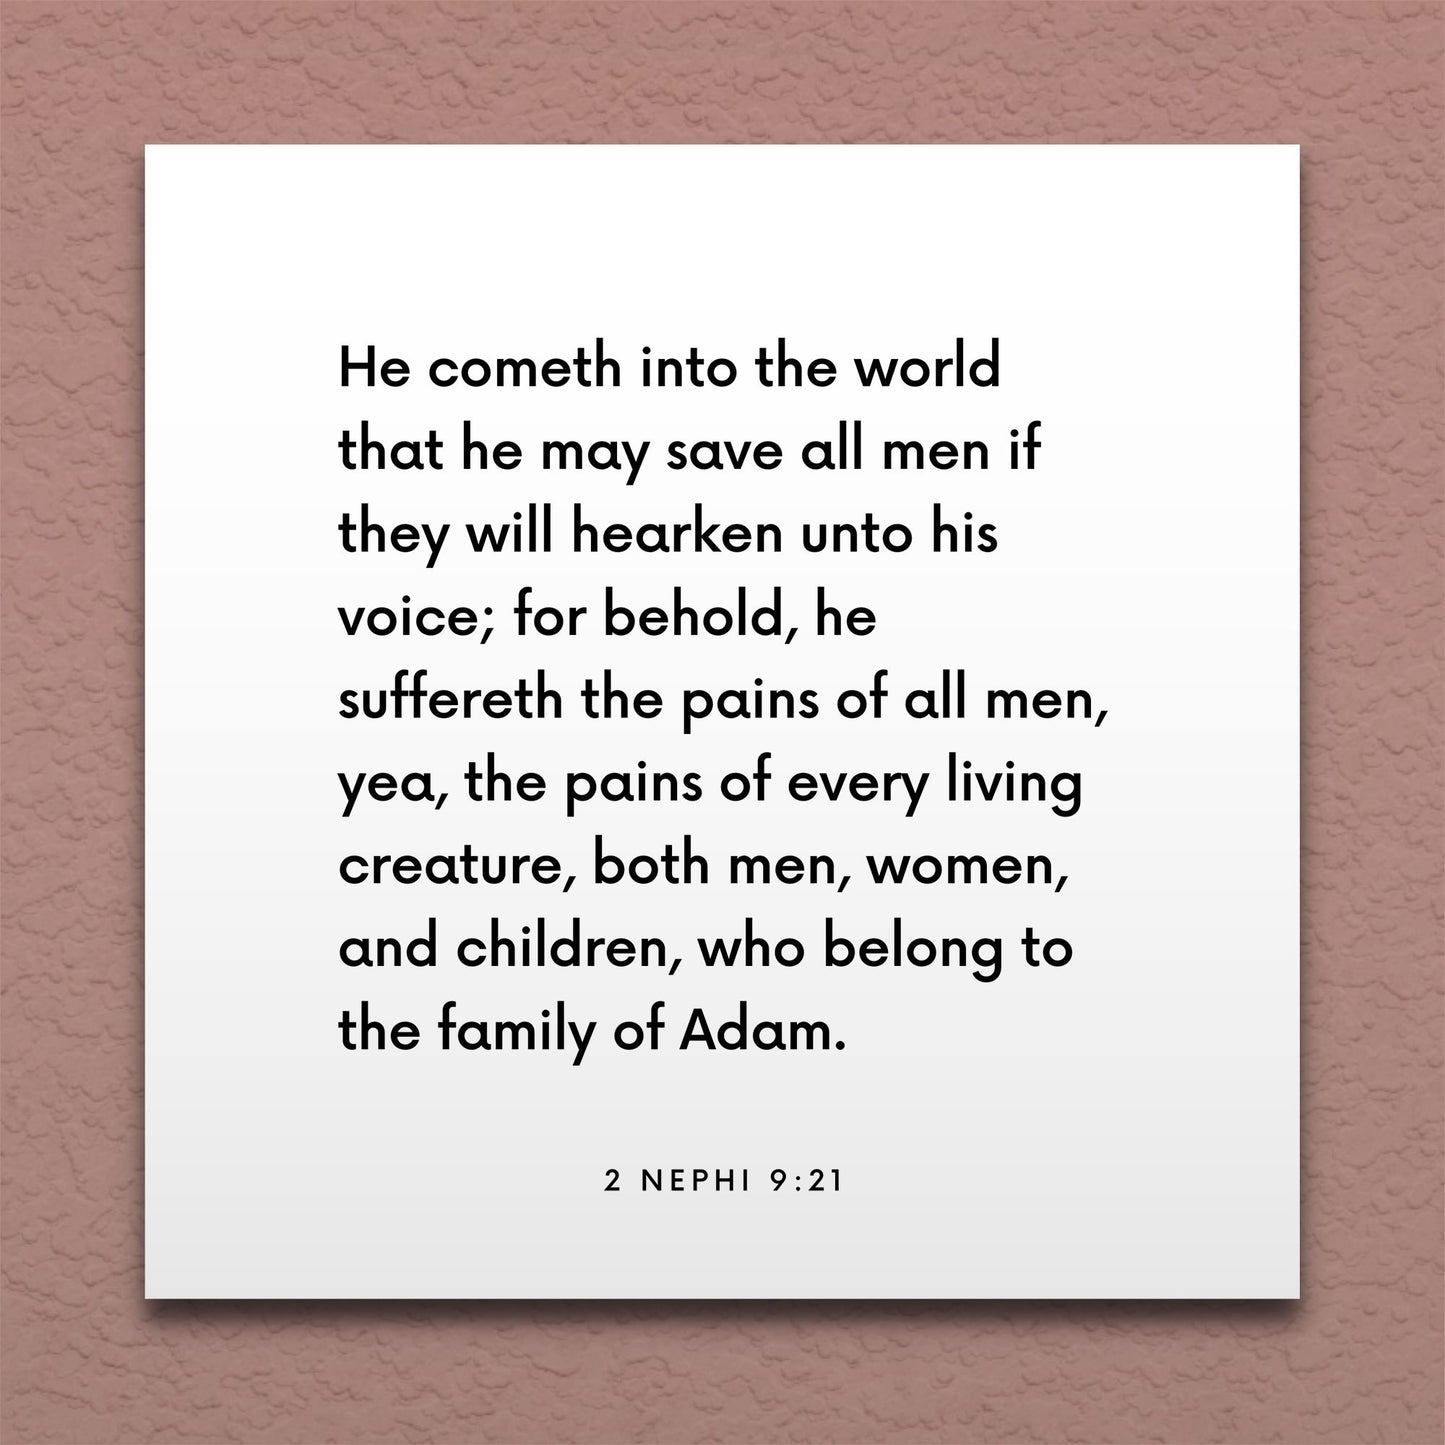 Wall-mounted scripture tile for 2 Nephi 9:21 - "He suffereth the pains of every living creature"